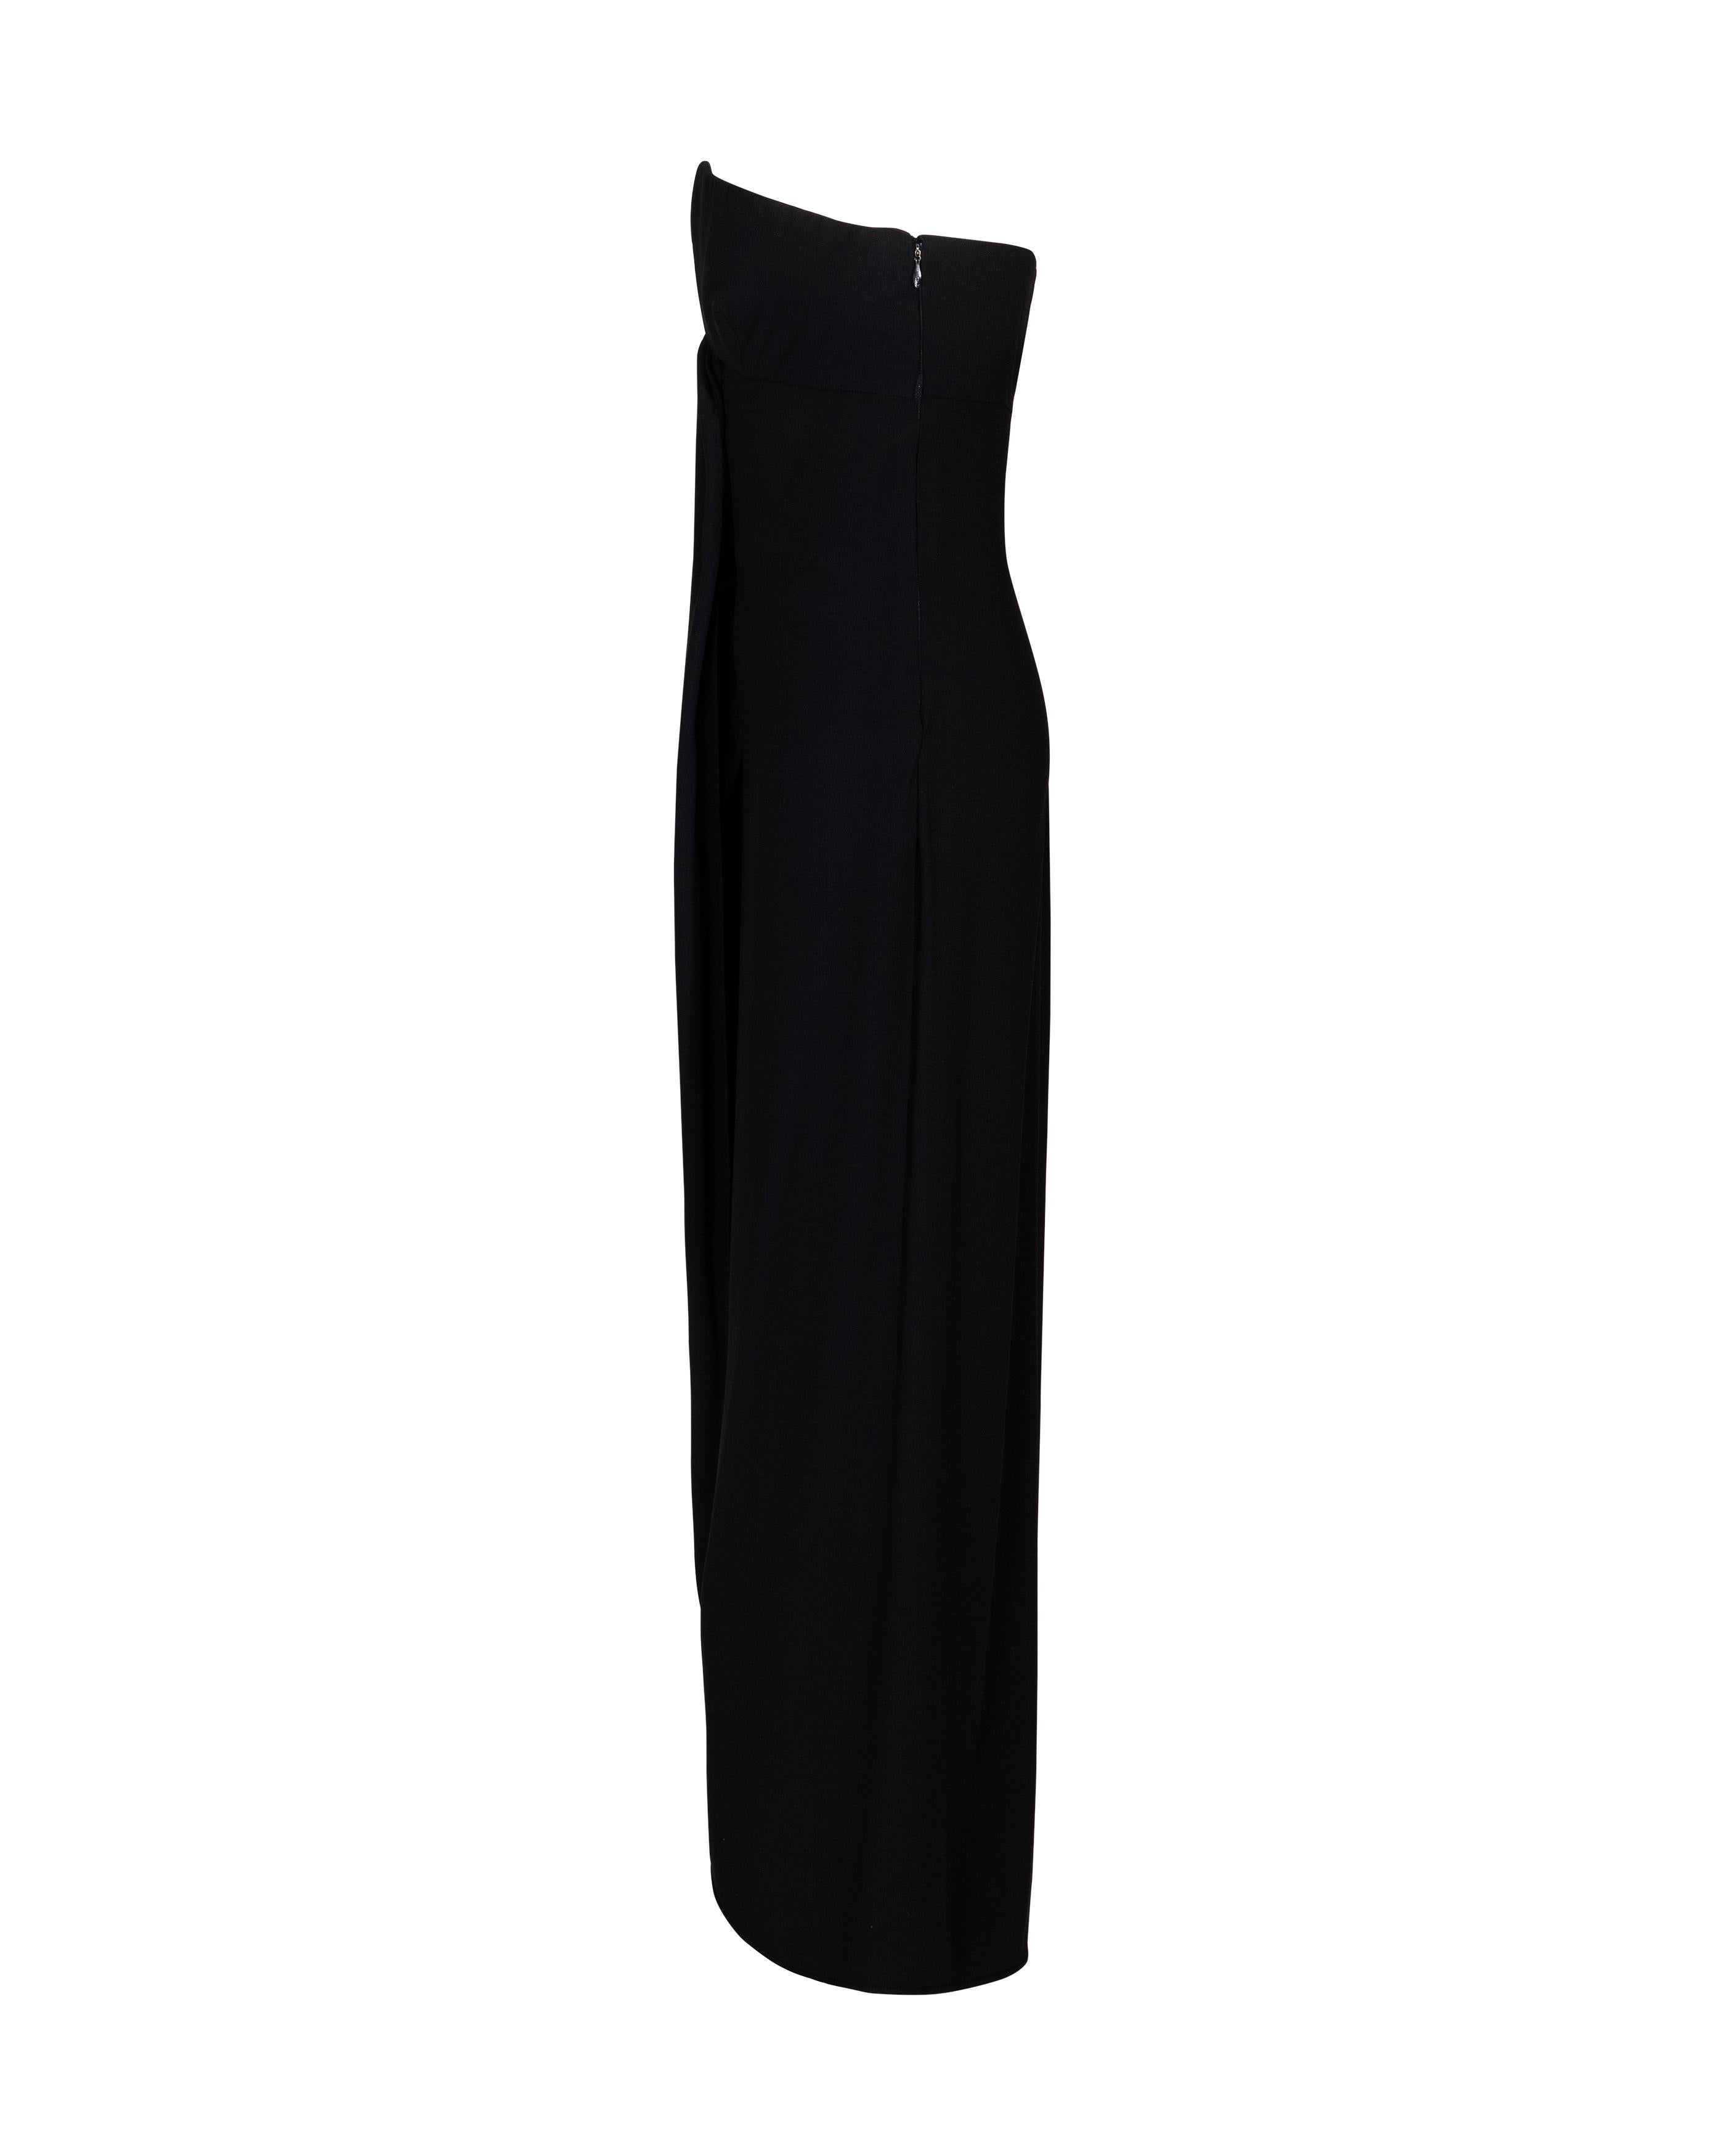 Women's S/S 2000 Valentino Black Strapless Gown with Open Bust For Sale